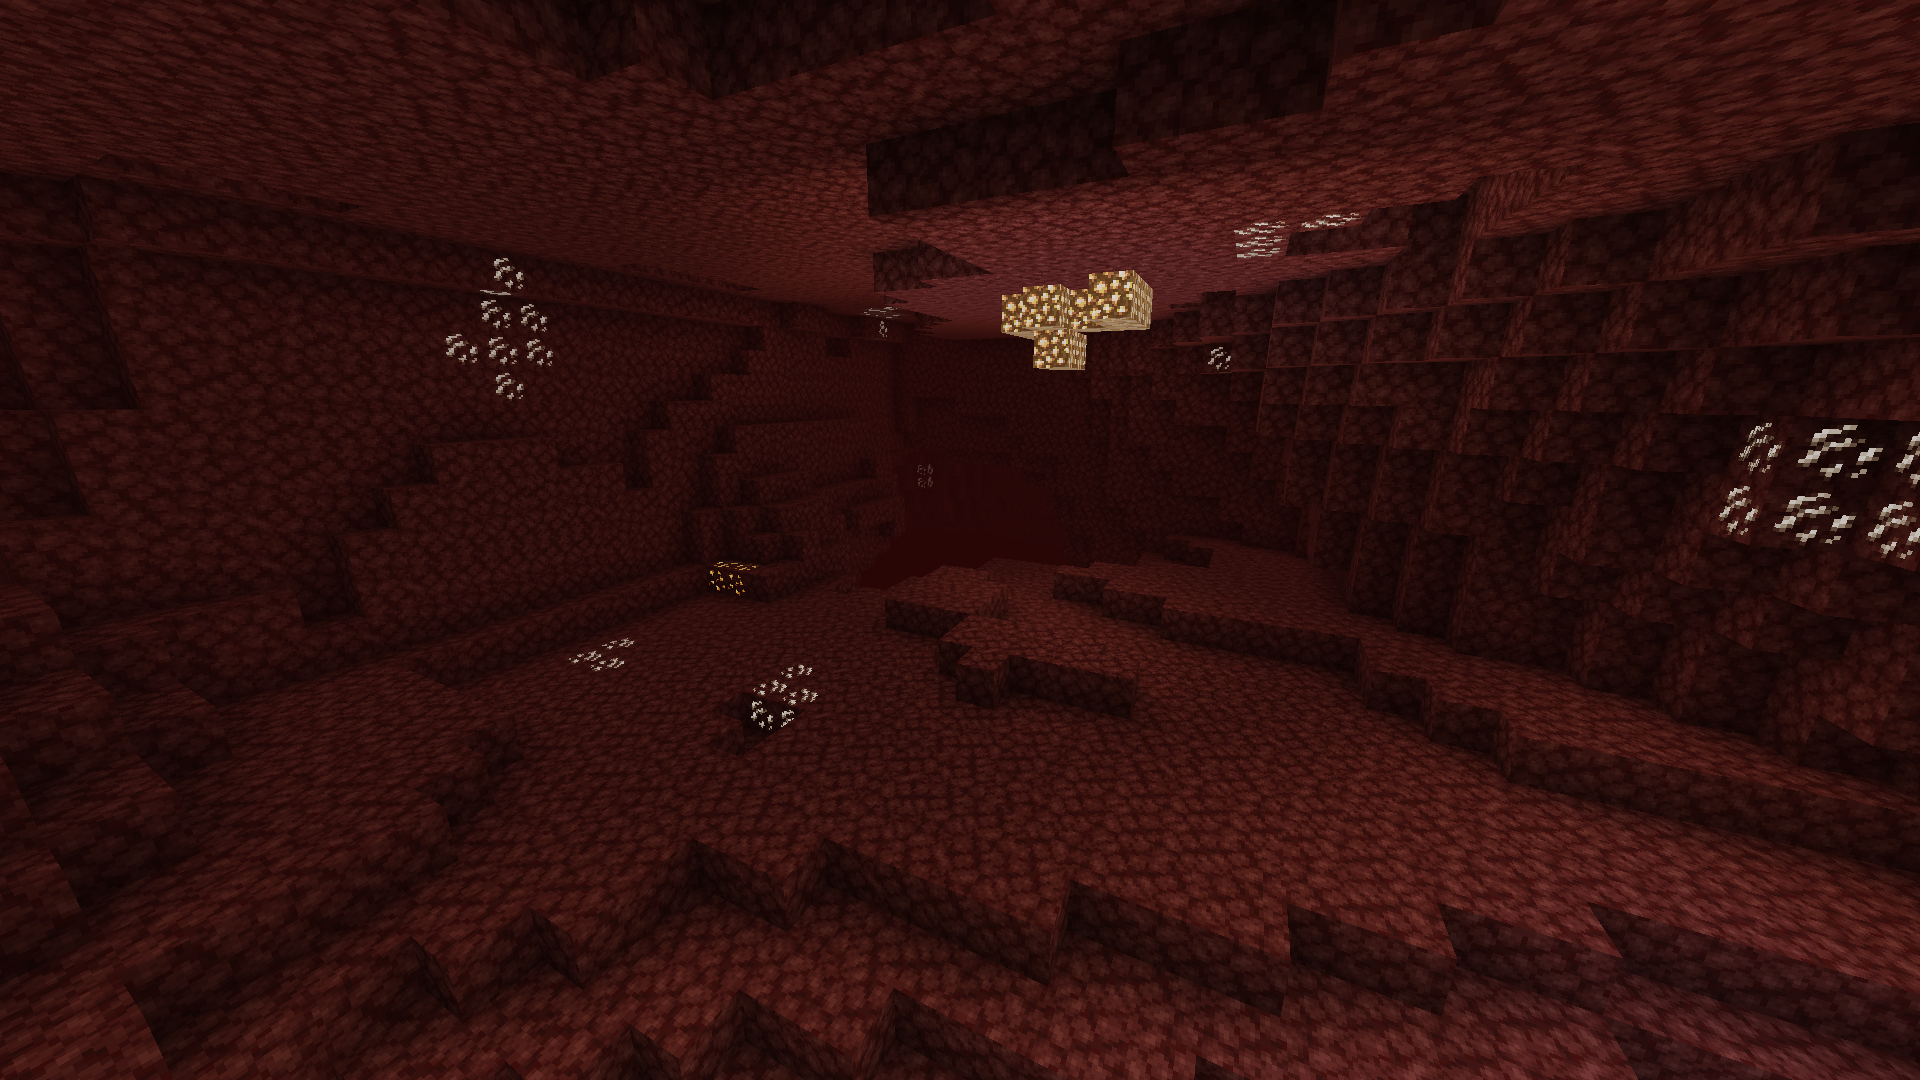 The nether